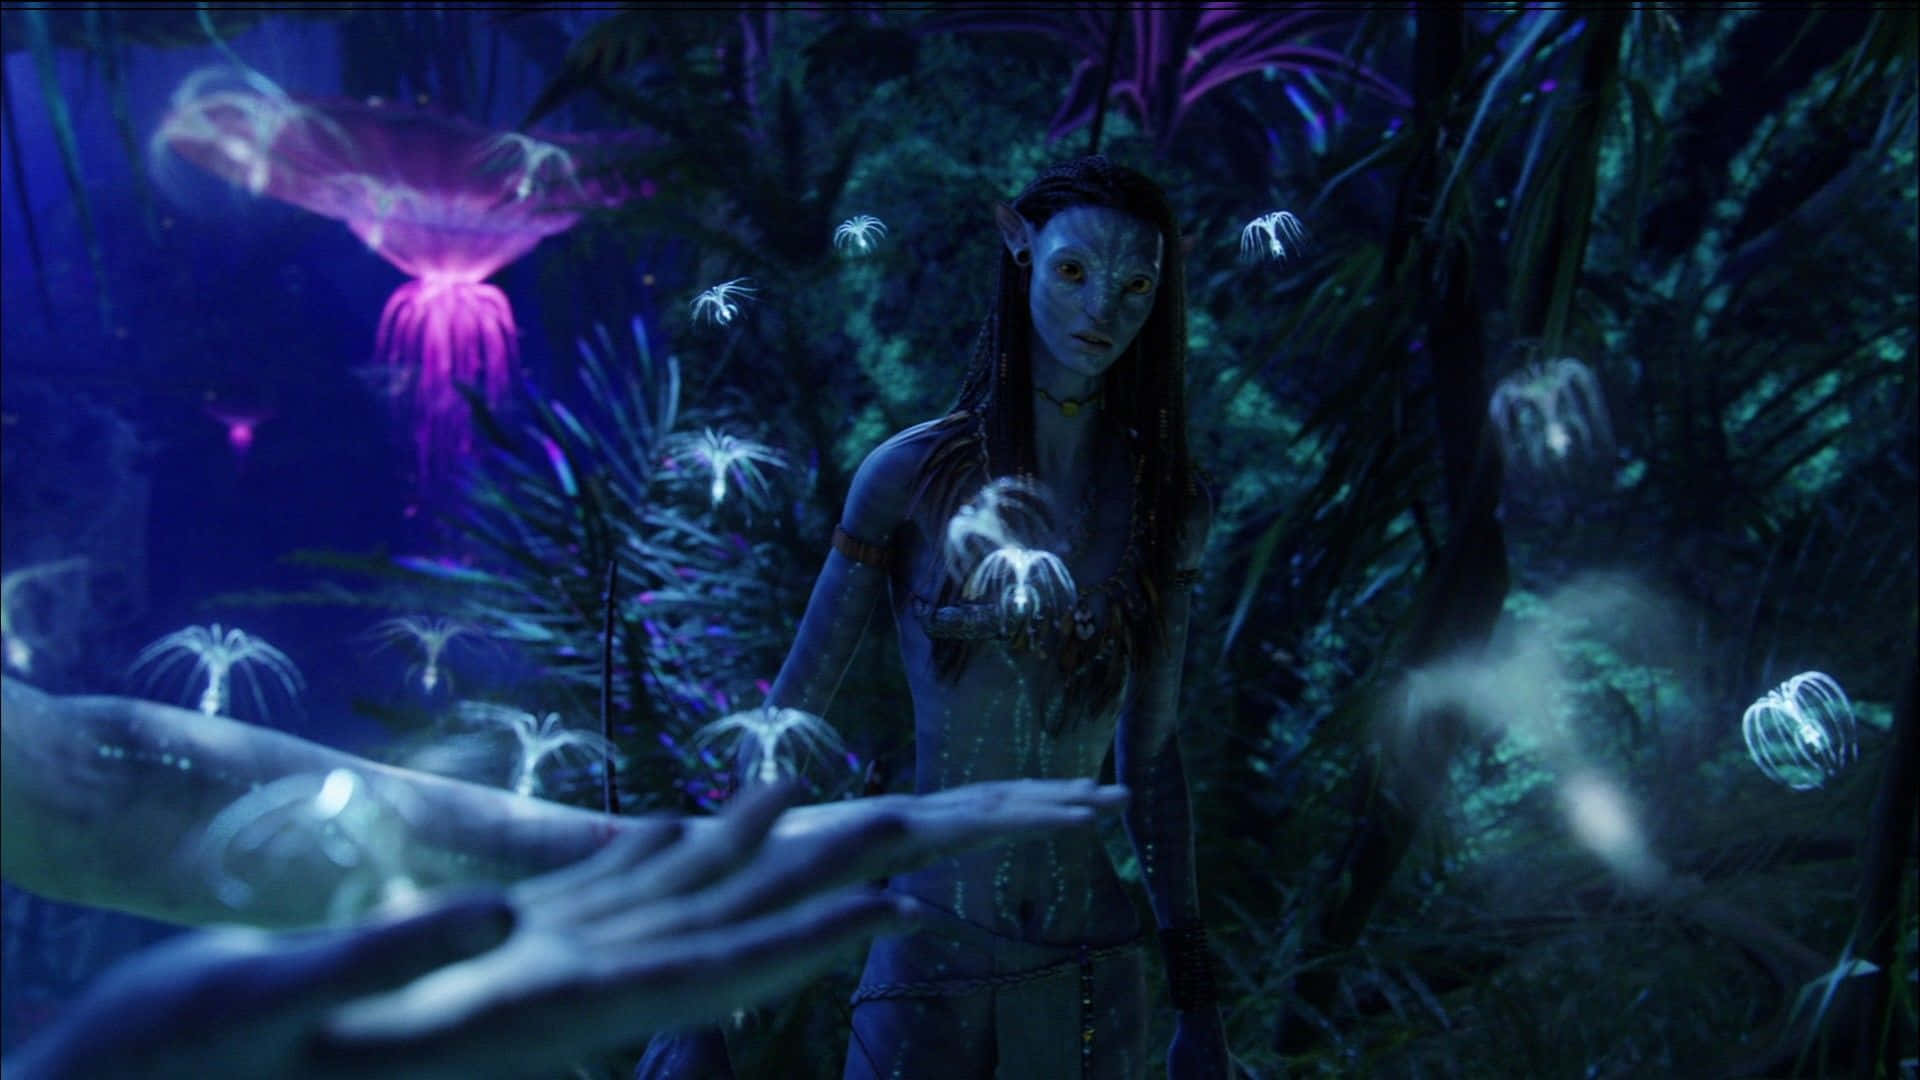 "Explore the wonders of the world of Pandora in the iconic movie Avatar"